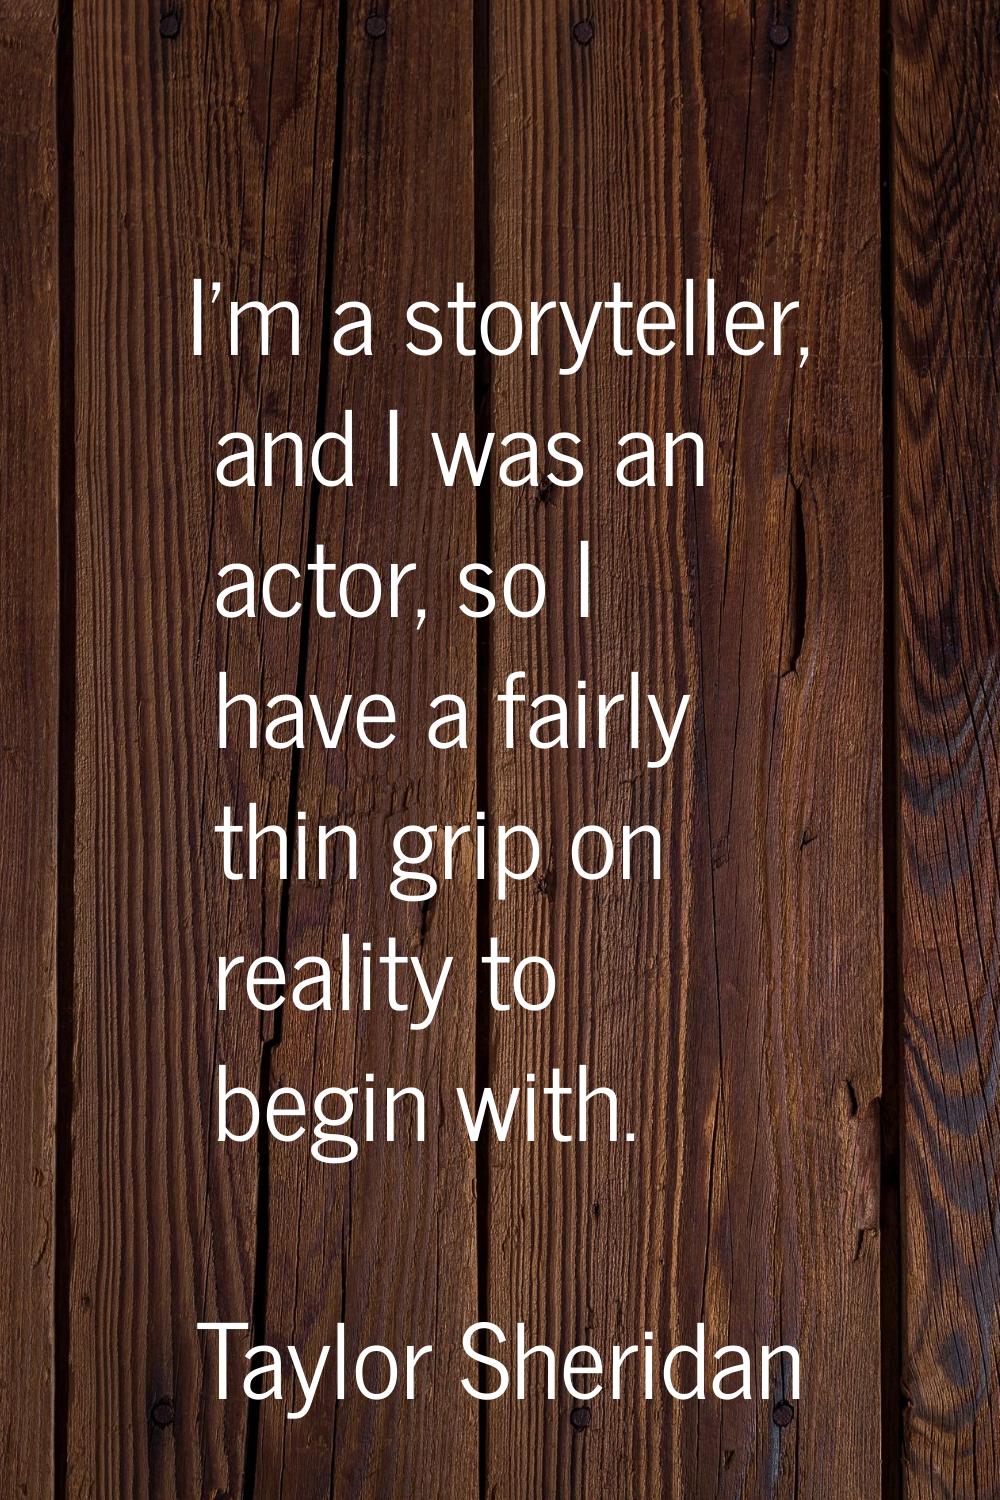 I'm a storyteller, and I was an actor, so I have a fairly thin grip on reality to begin with.